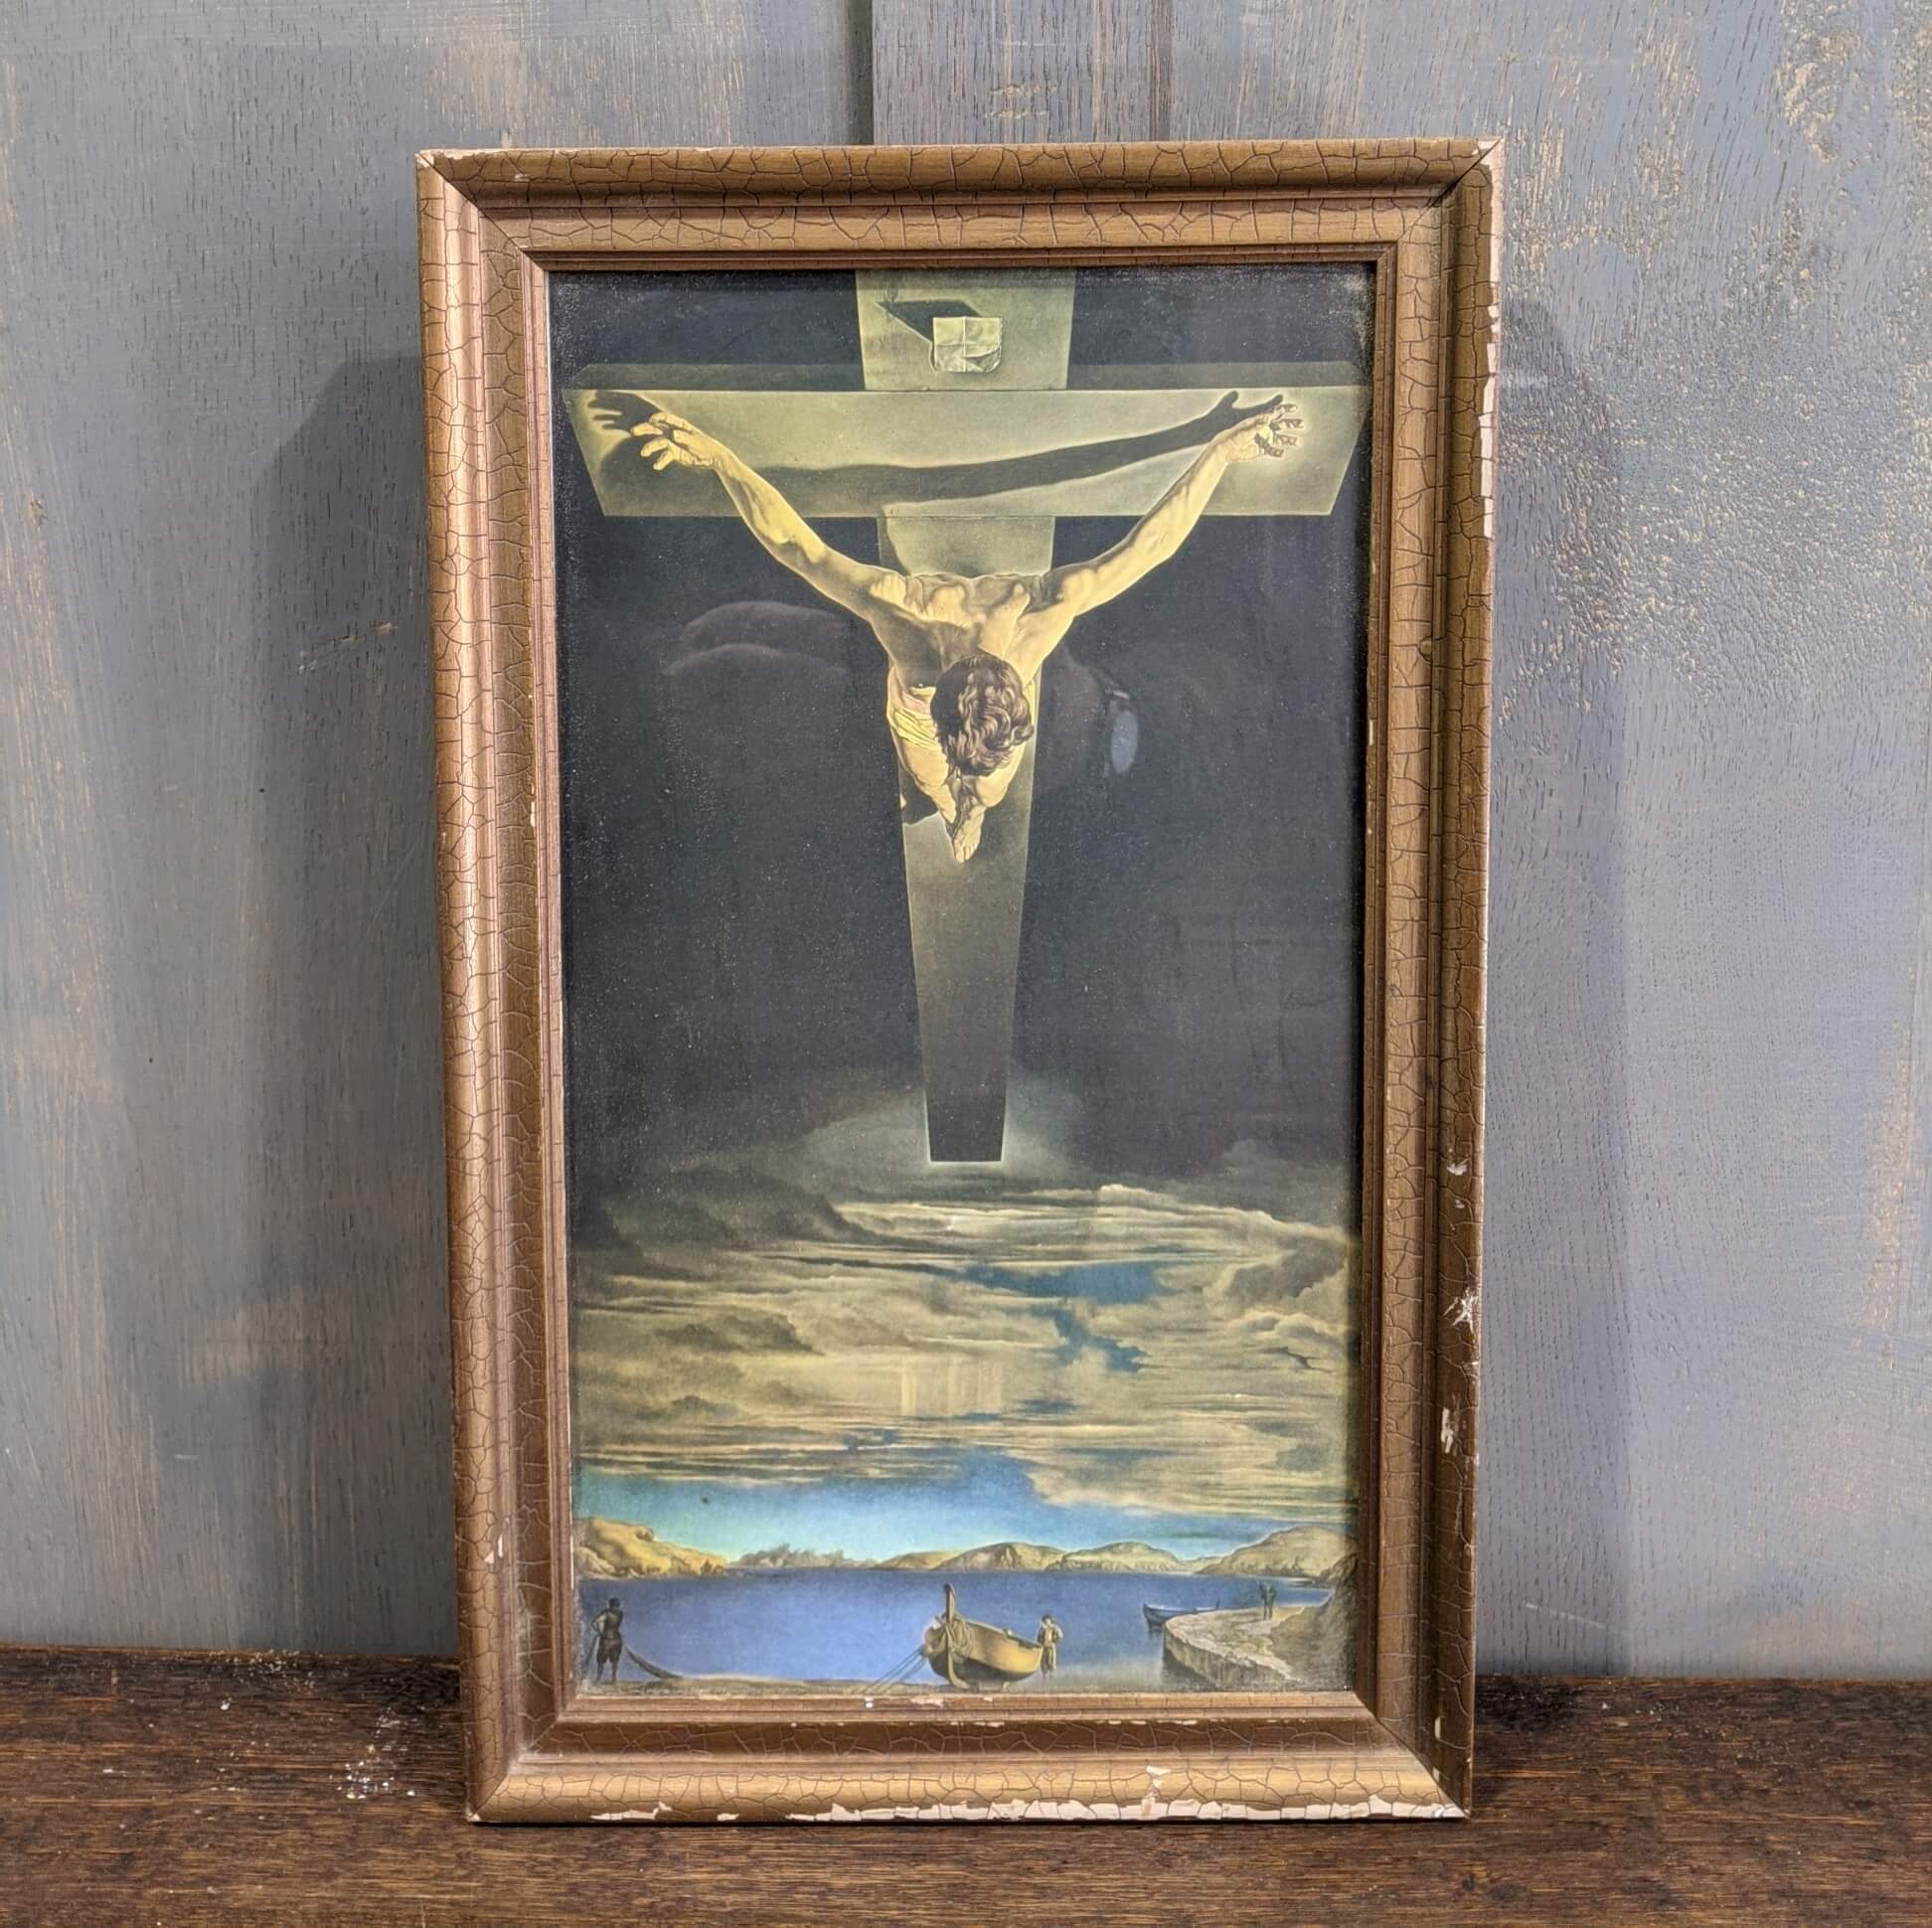 Small Print Of Christ By St John Of The Cross By Salvador Dali Sold